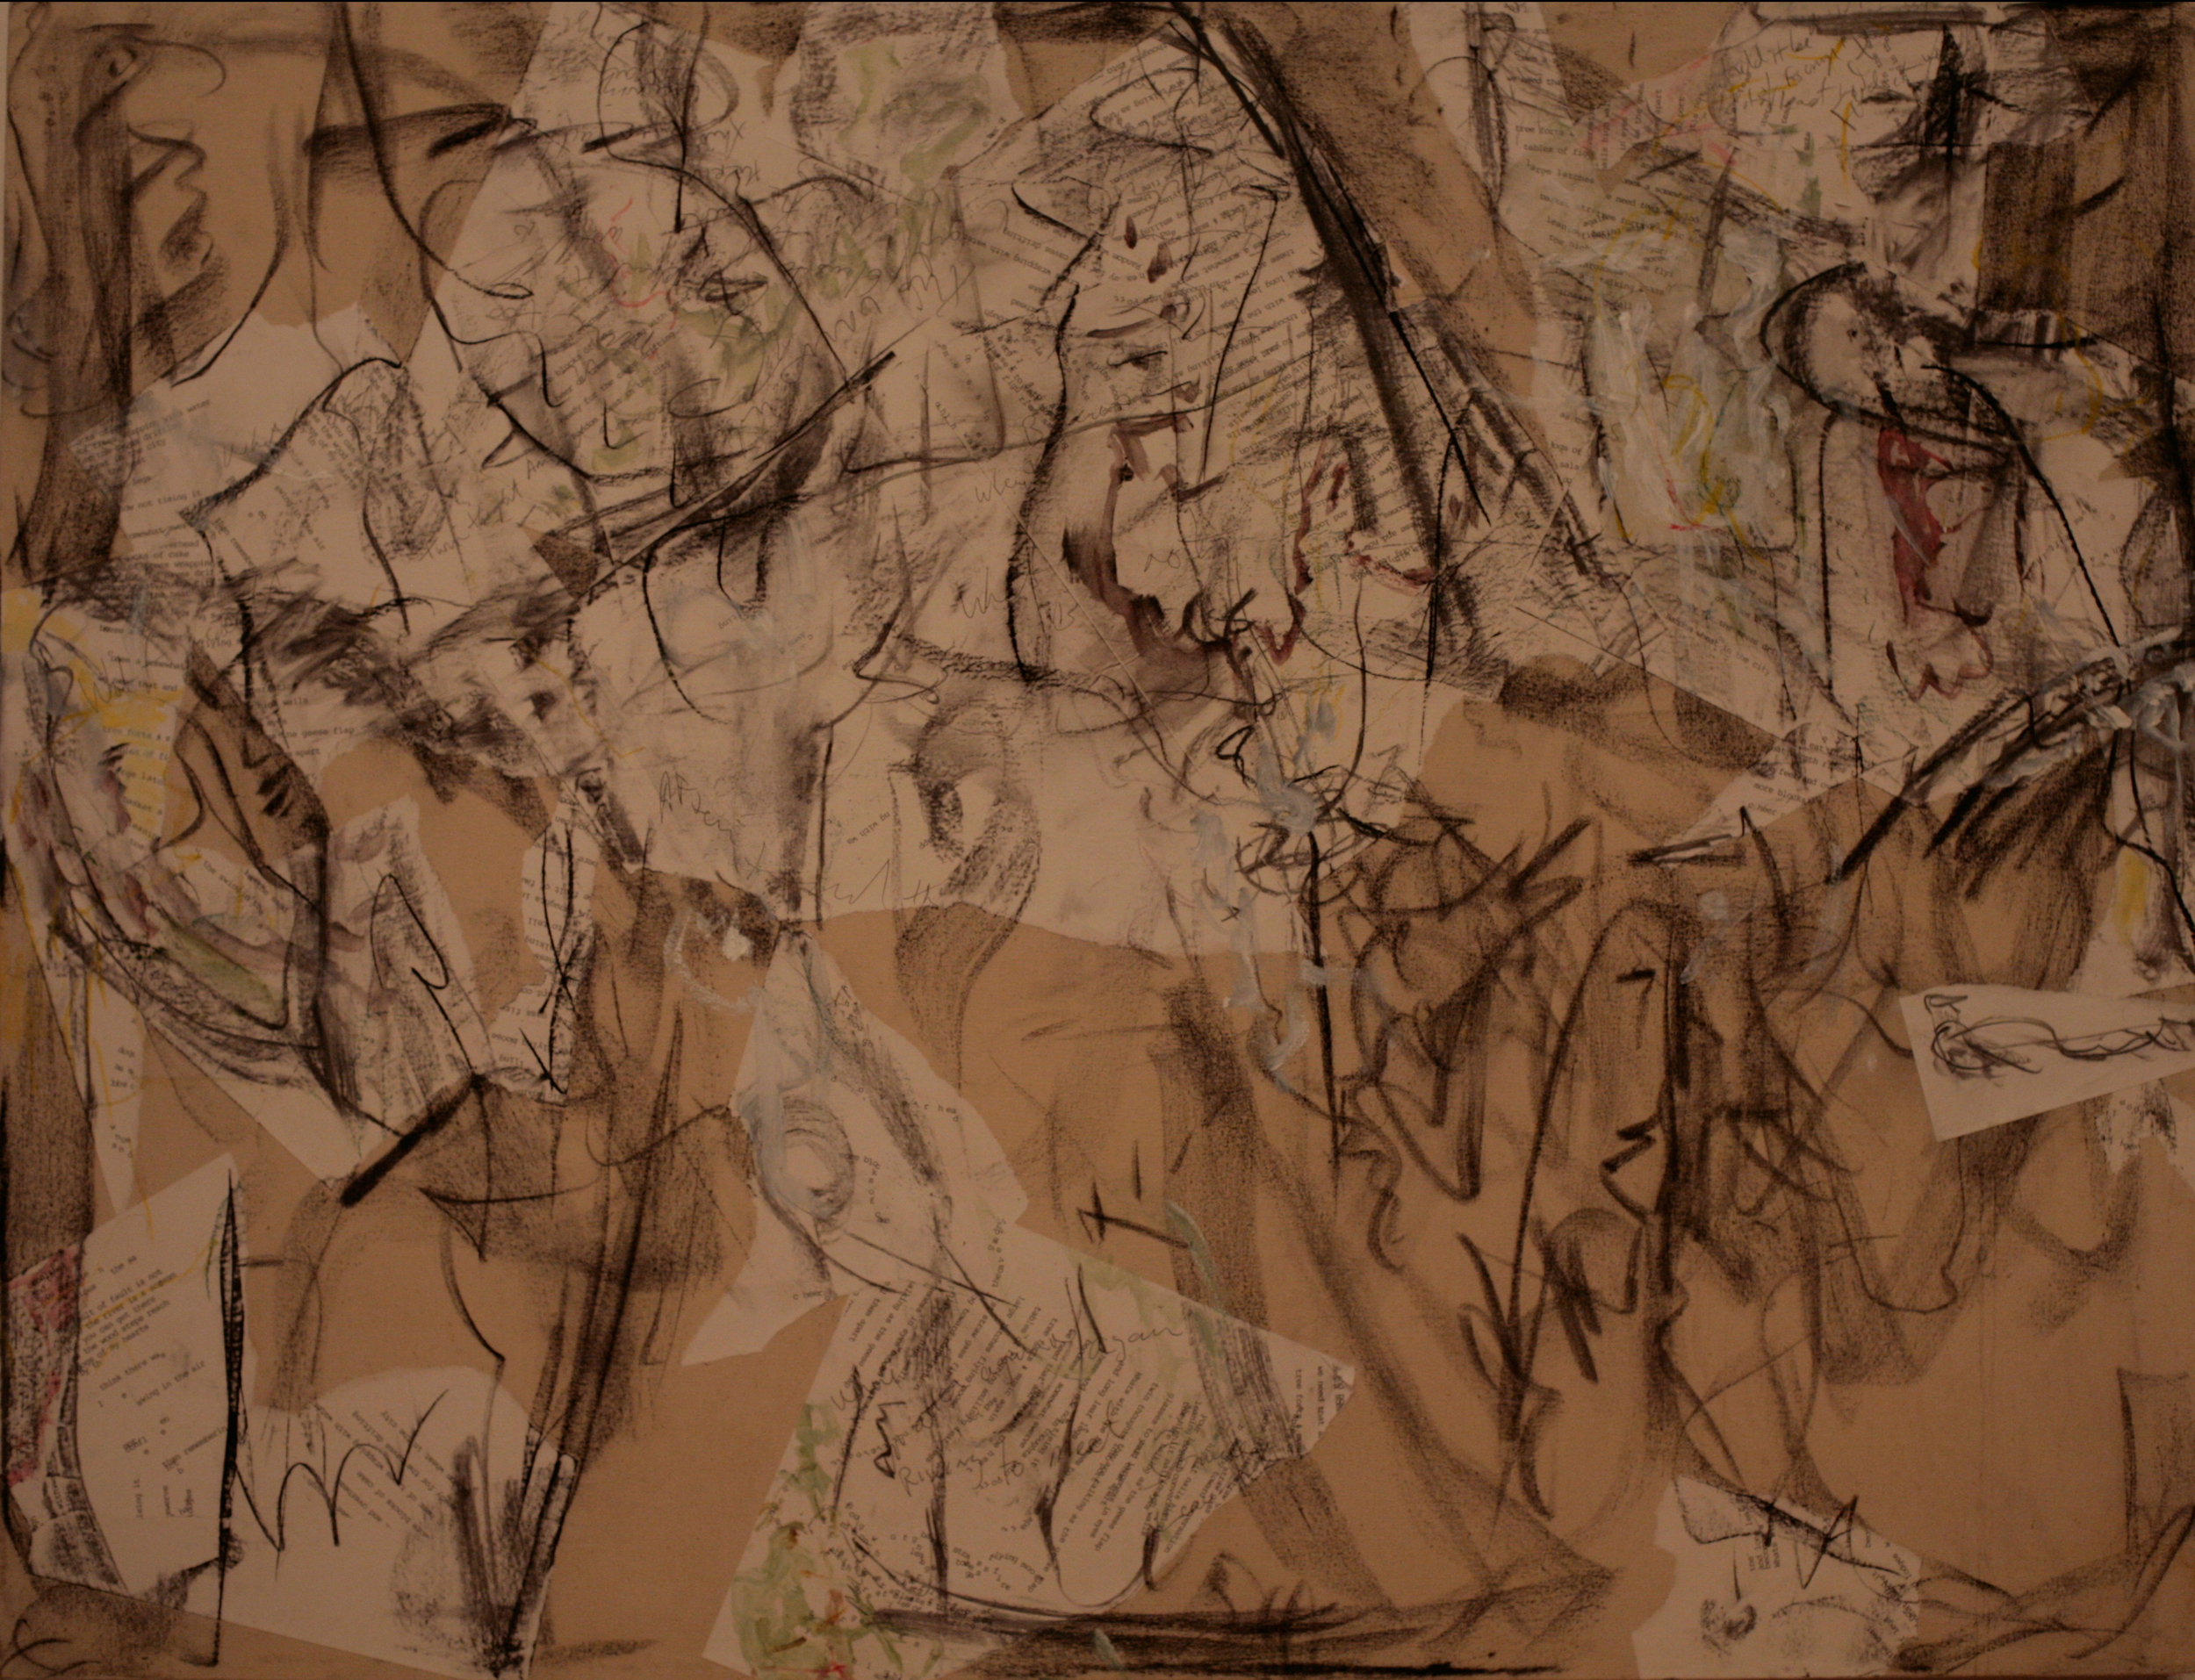 "Wordtree" #15, charcoal and mixed media on canvas, 38"x48"